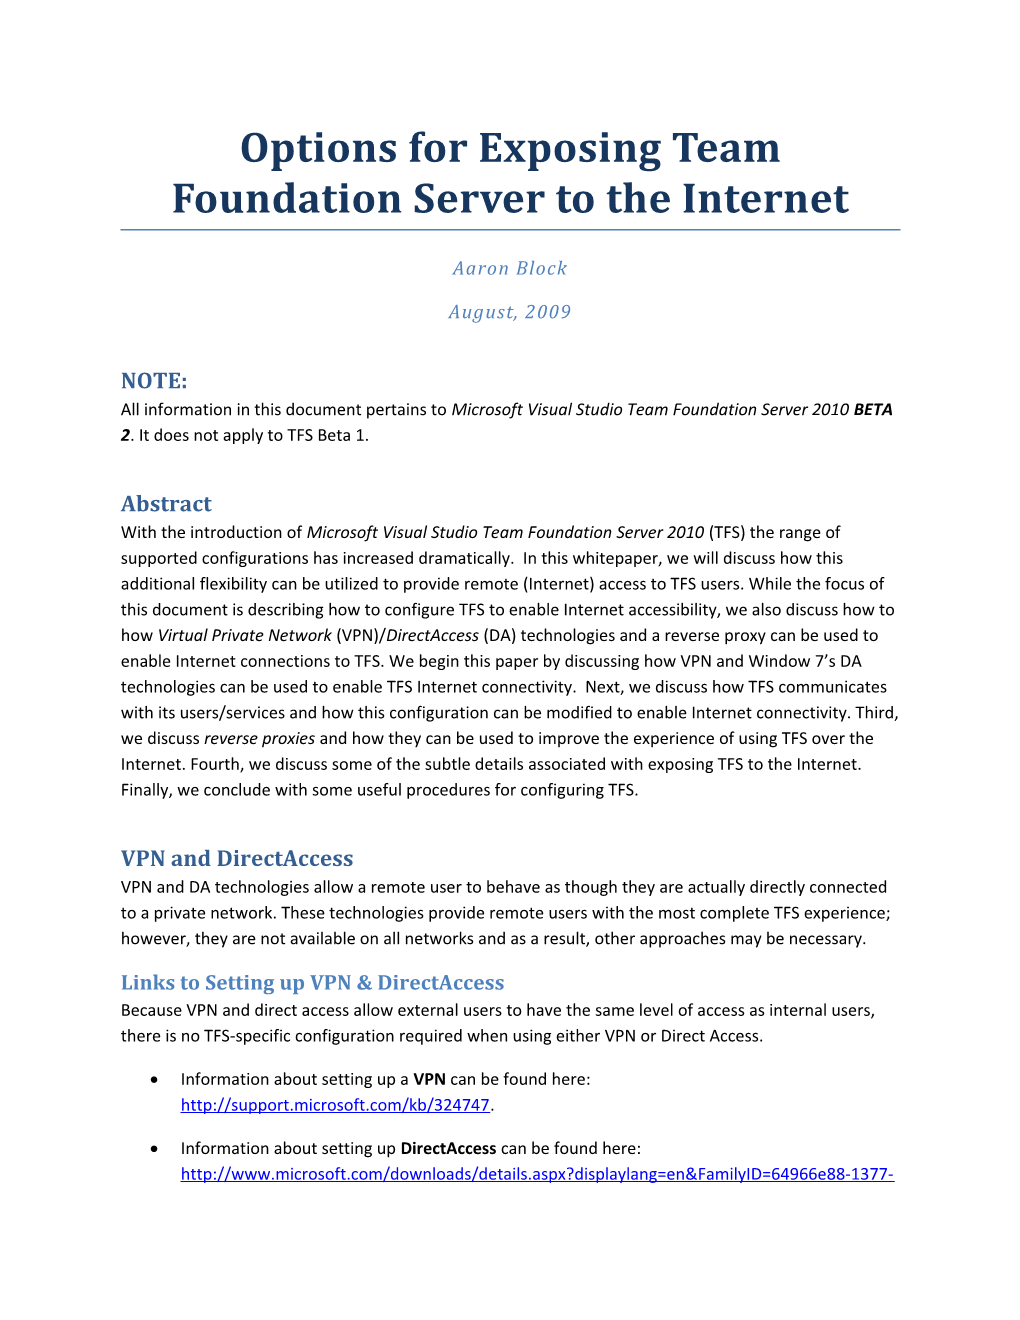 Options for Exposing Team Foundation Server to the Internet